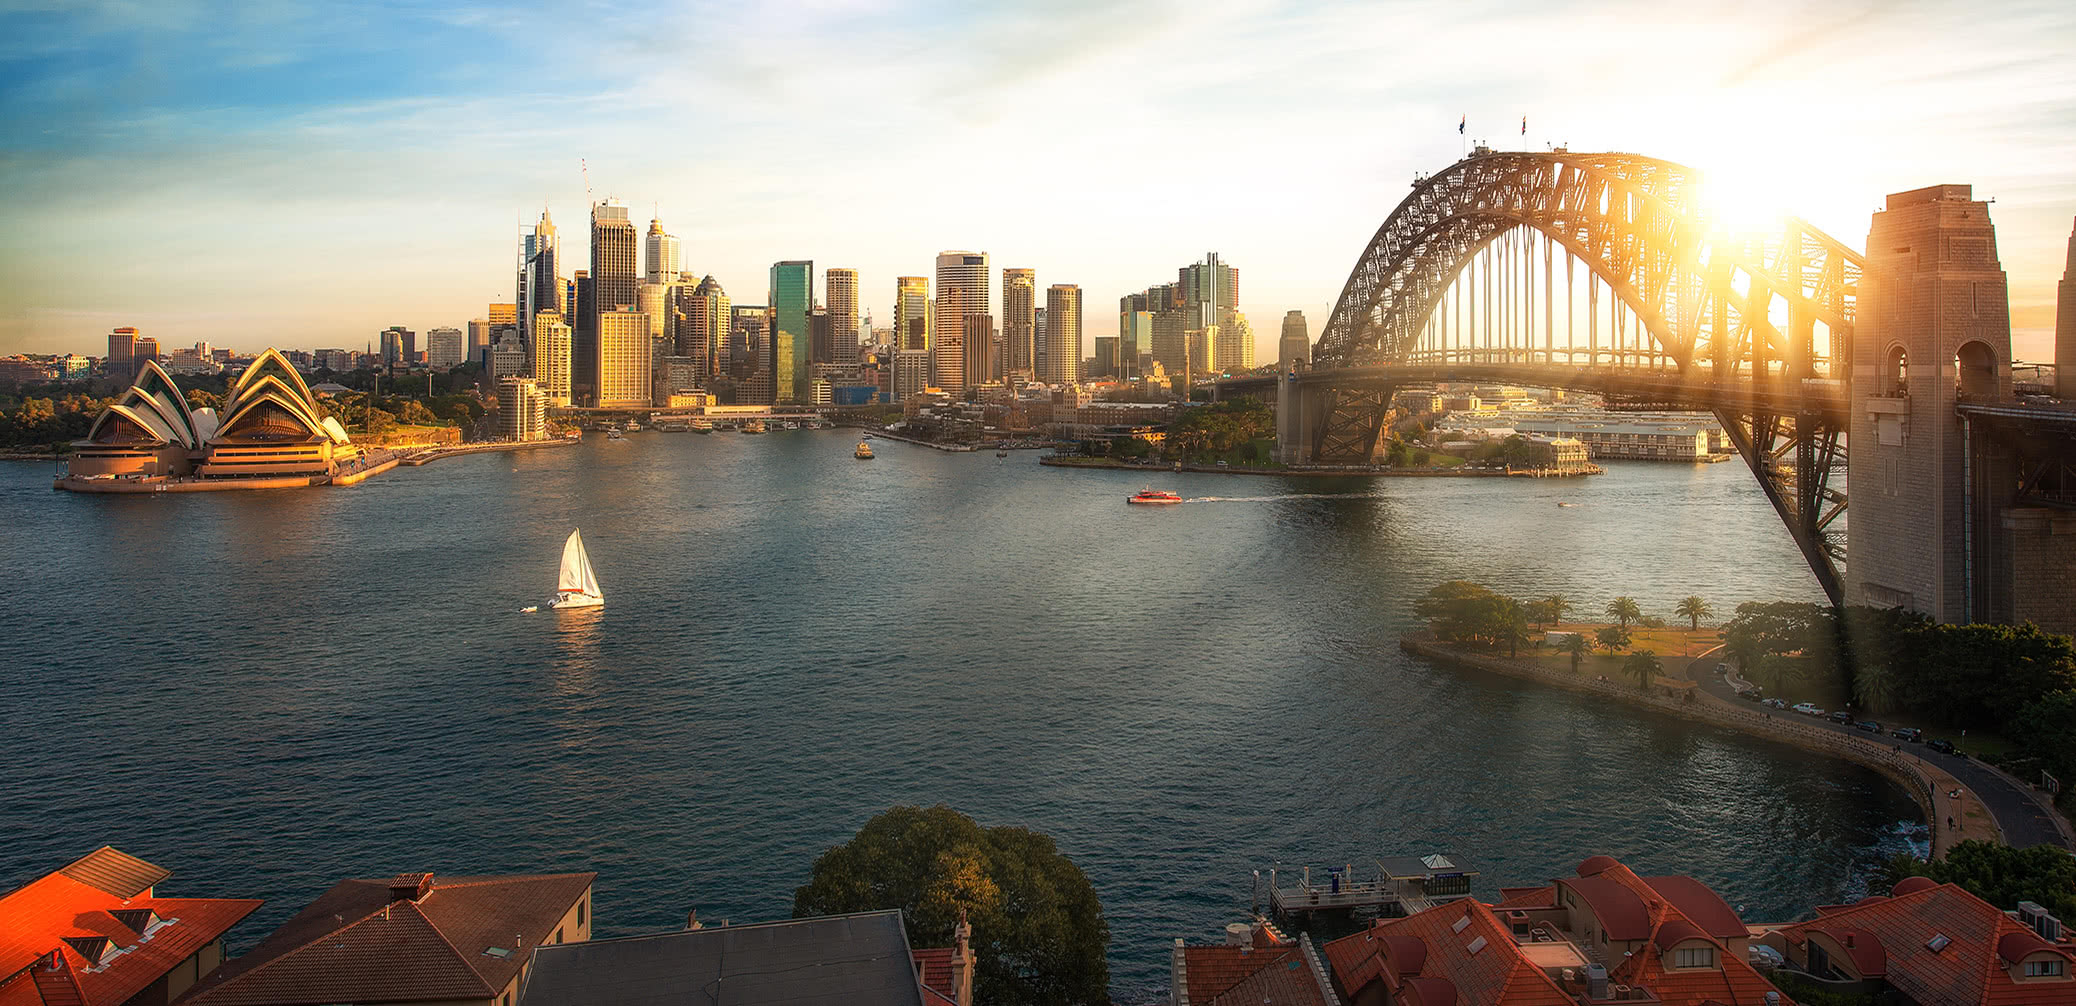 10 Best Hotels in Sydney With Harbor Views